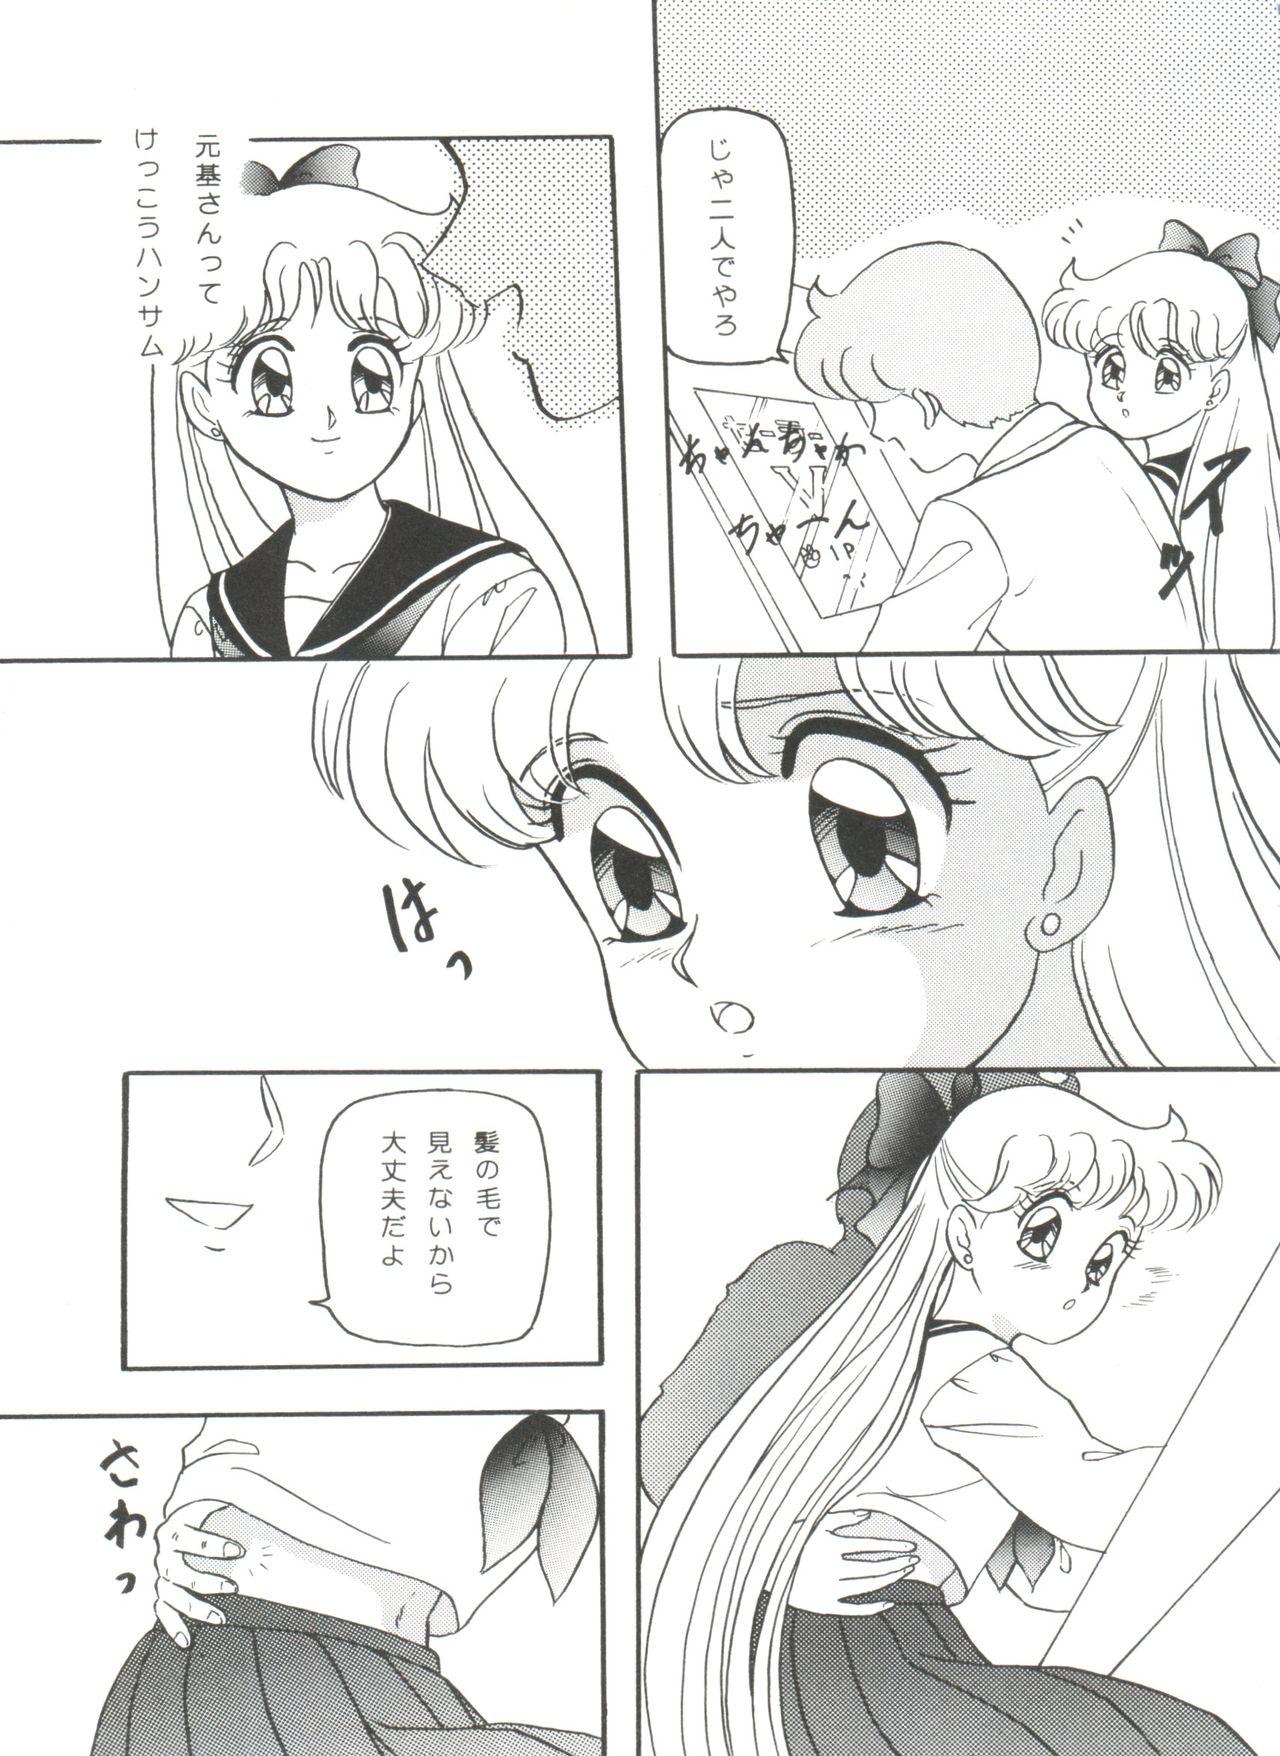 Danish From the Moon - Sailor moon Fishnet - Page 7